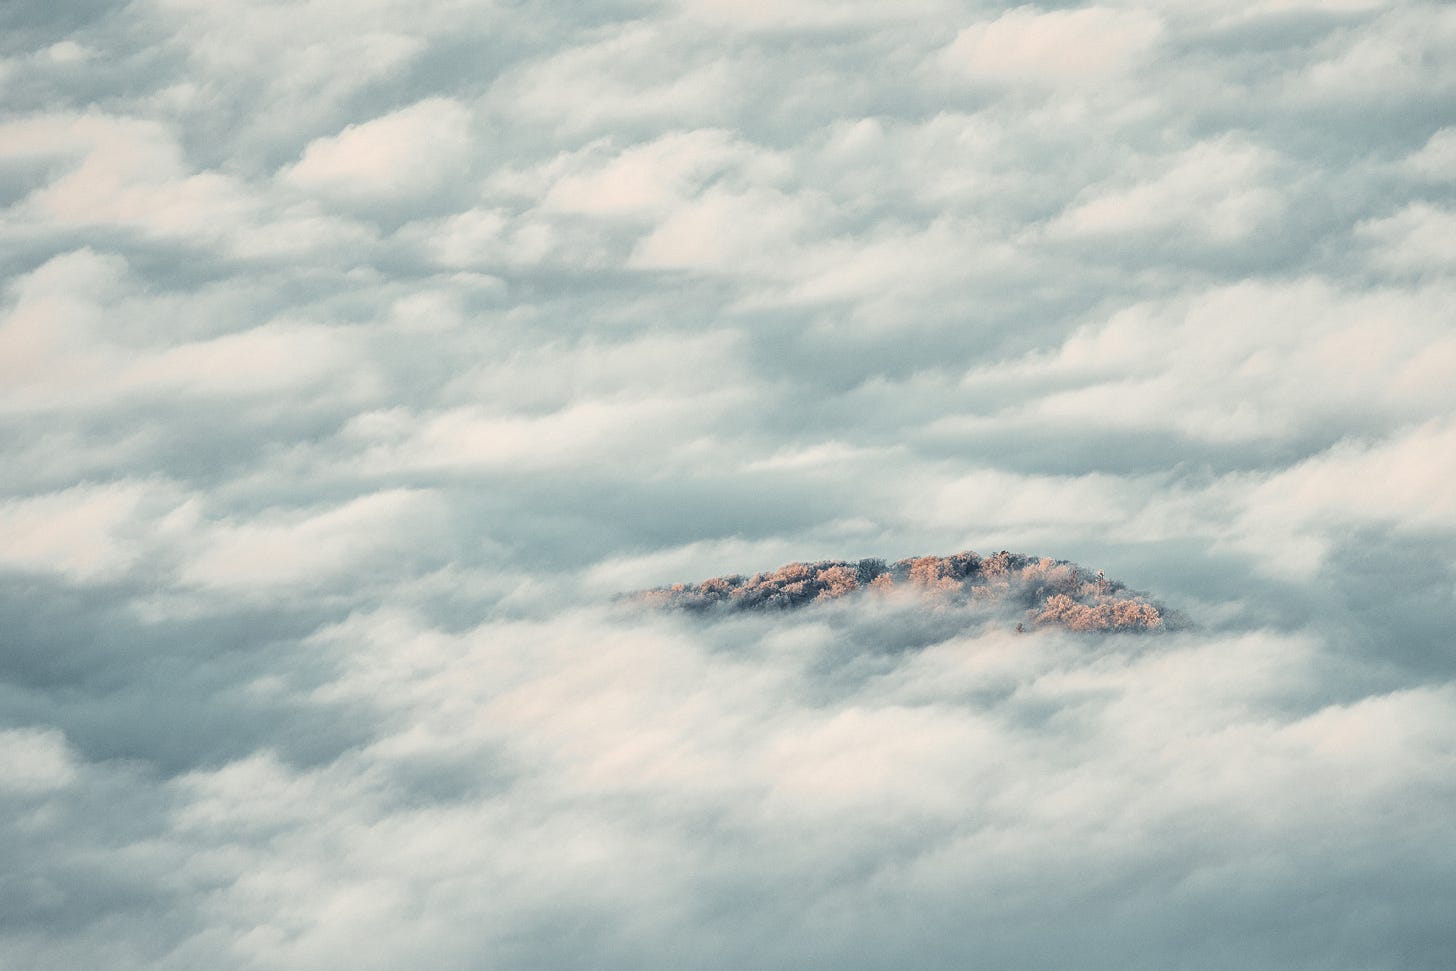 Mountain peak emerging through thick layer of clouds